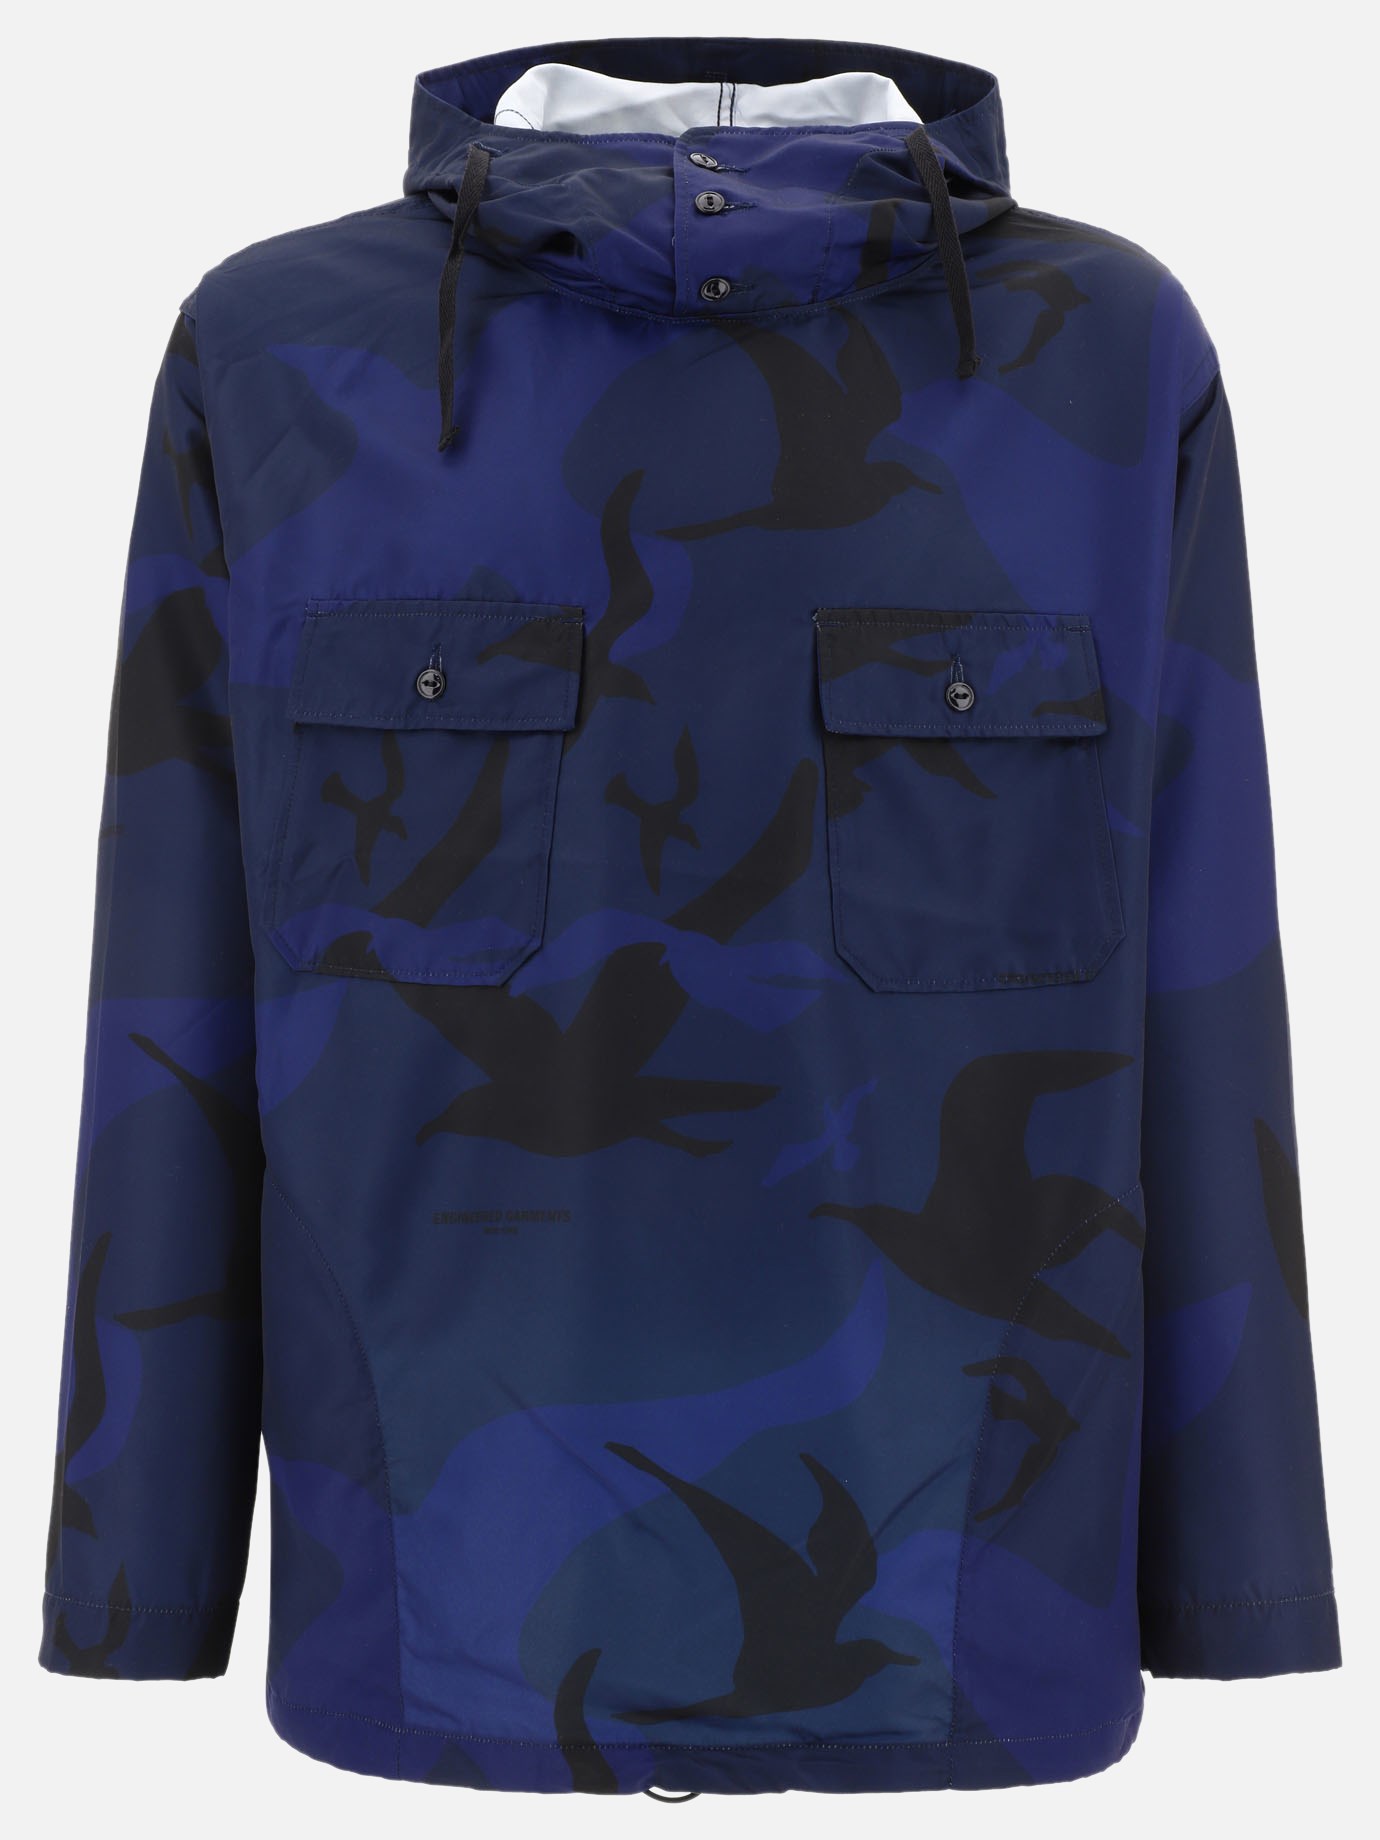 Overshirt  Cagoule by Engineered Garments - 0